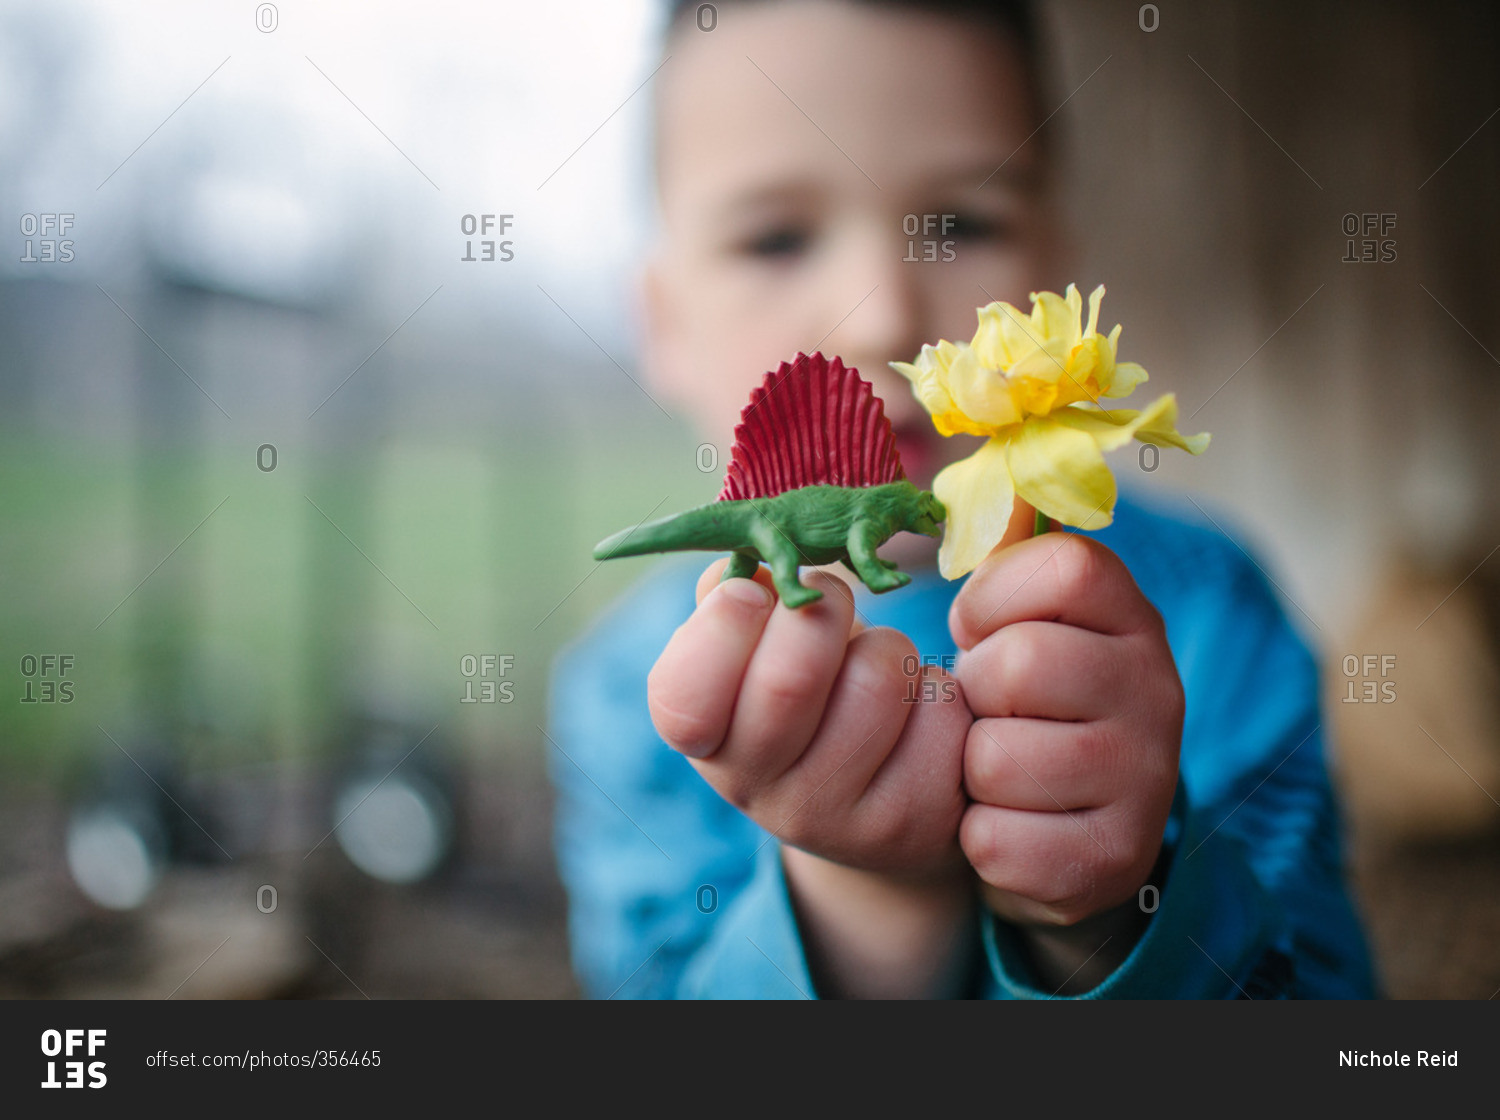 Little boy holding yellow flower and toy dinosaur